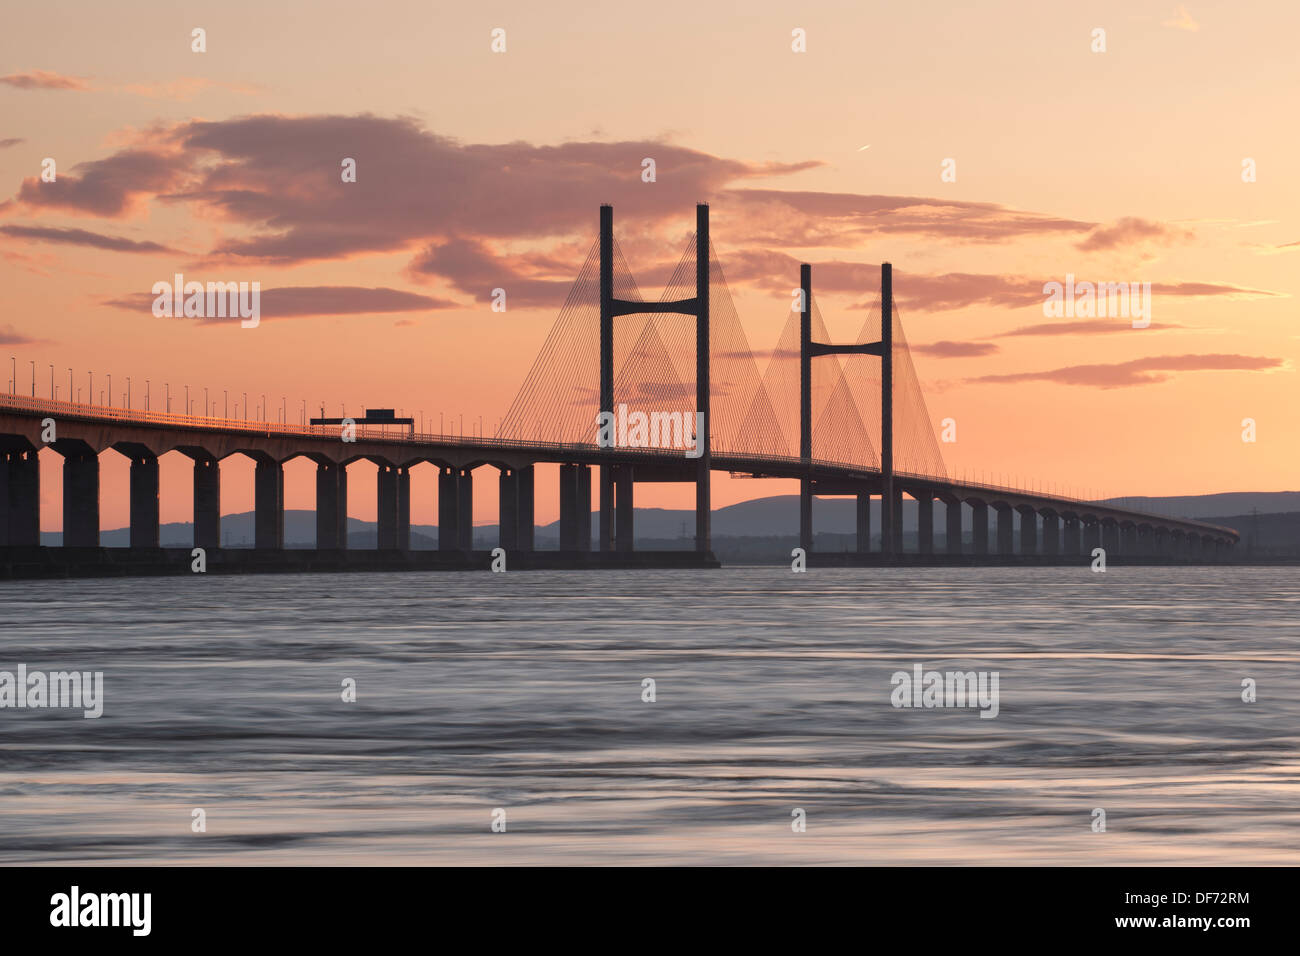 A colourful sunset over the Second Severn Crossing, carrying the M4 motorway, linking England and Wales. Stock Photo